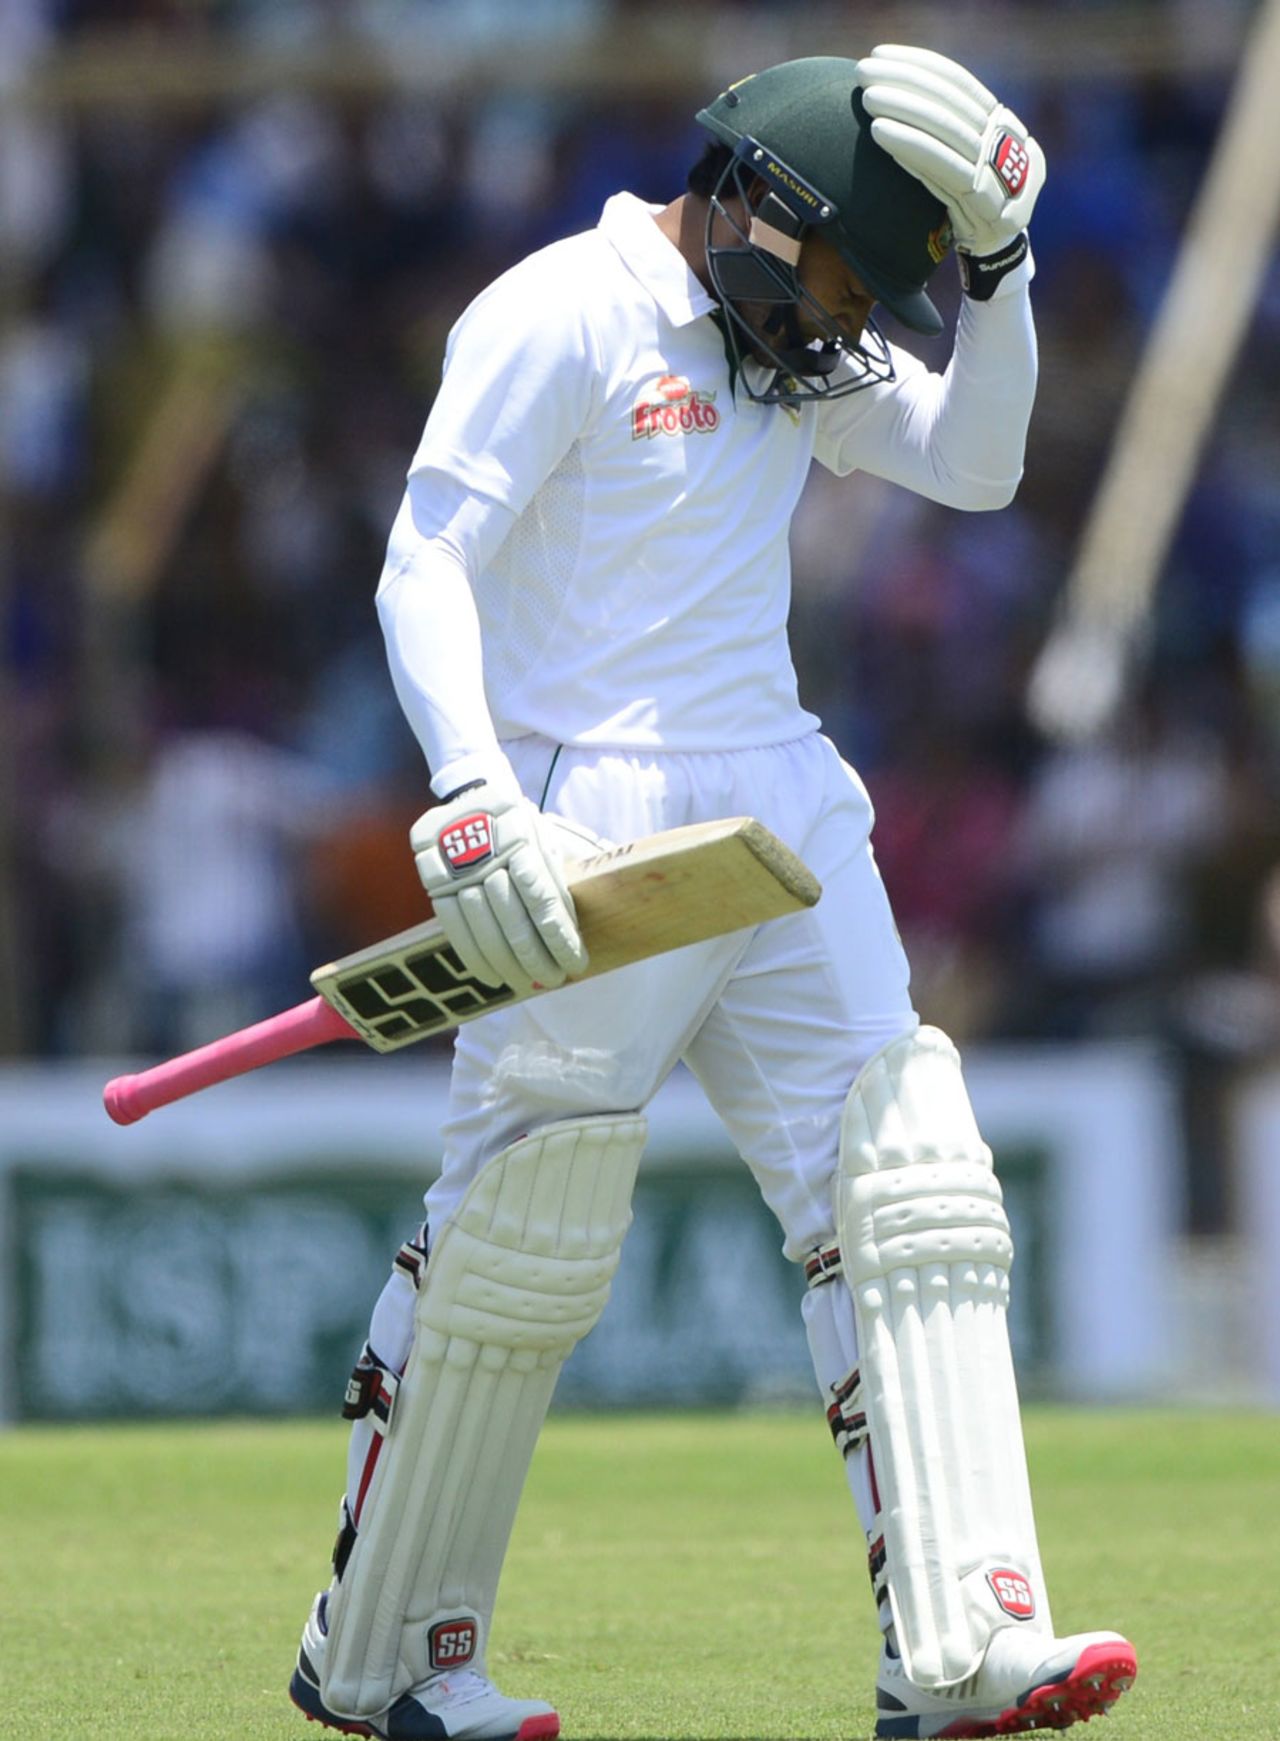 Mushfiqur Rahim is disappointed after mis-hitting to cover, Bangladesh v Pakistan, 1st Test, Khulna, 2nd day, April 29, 2015